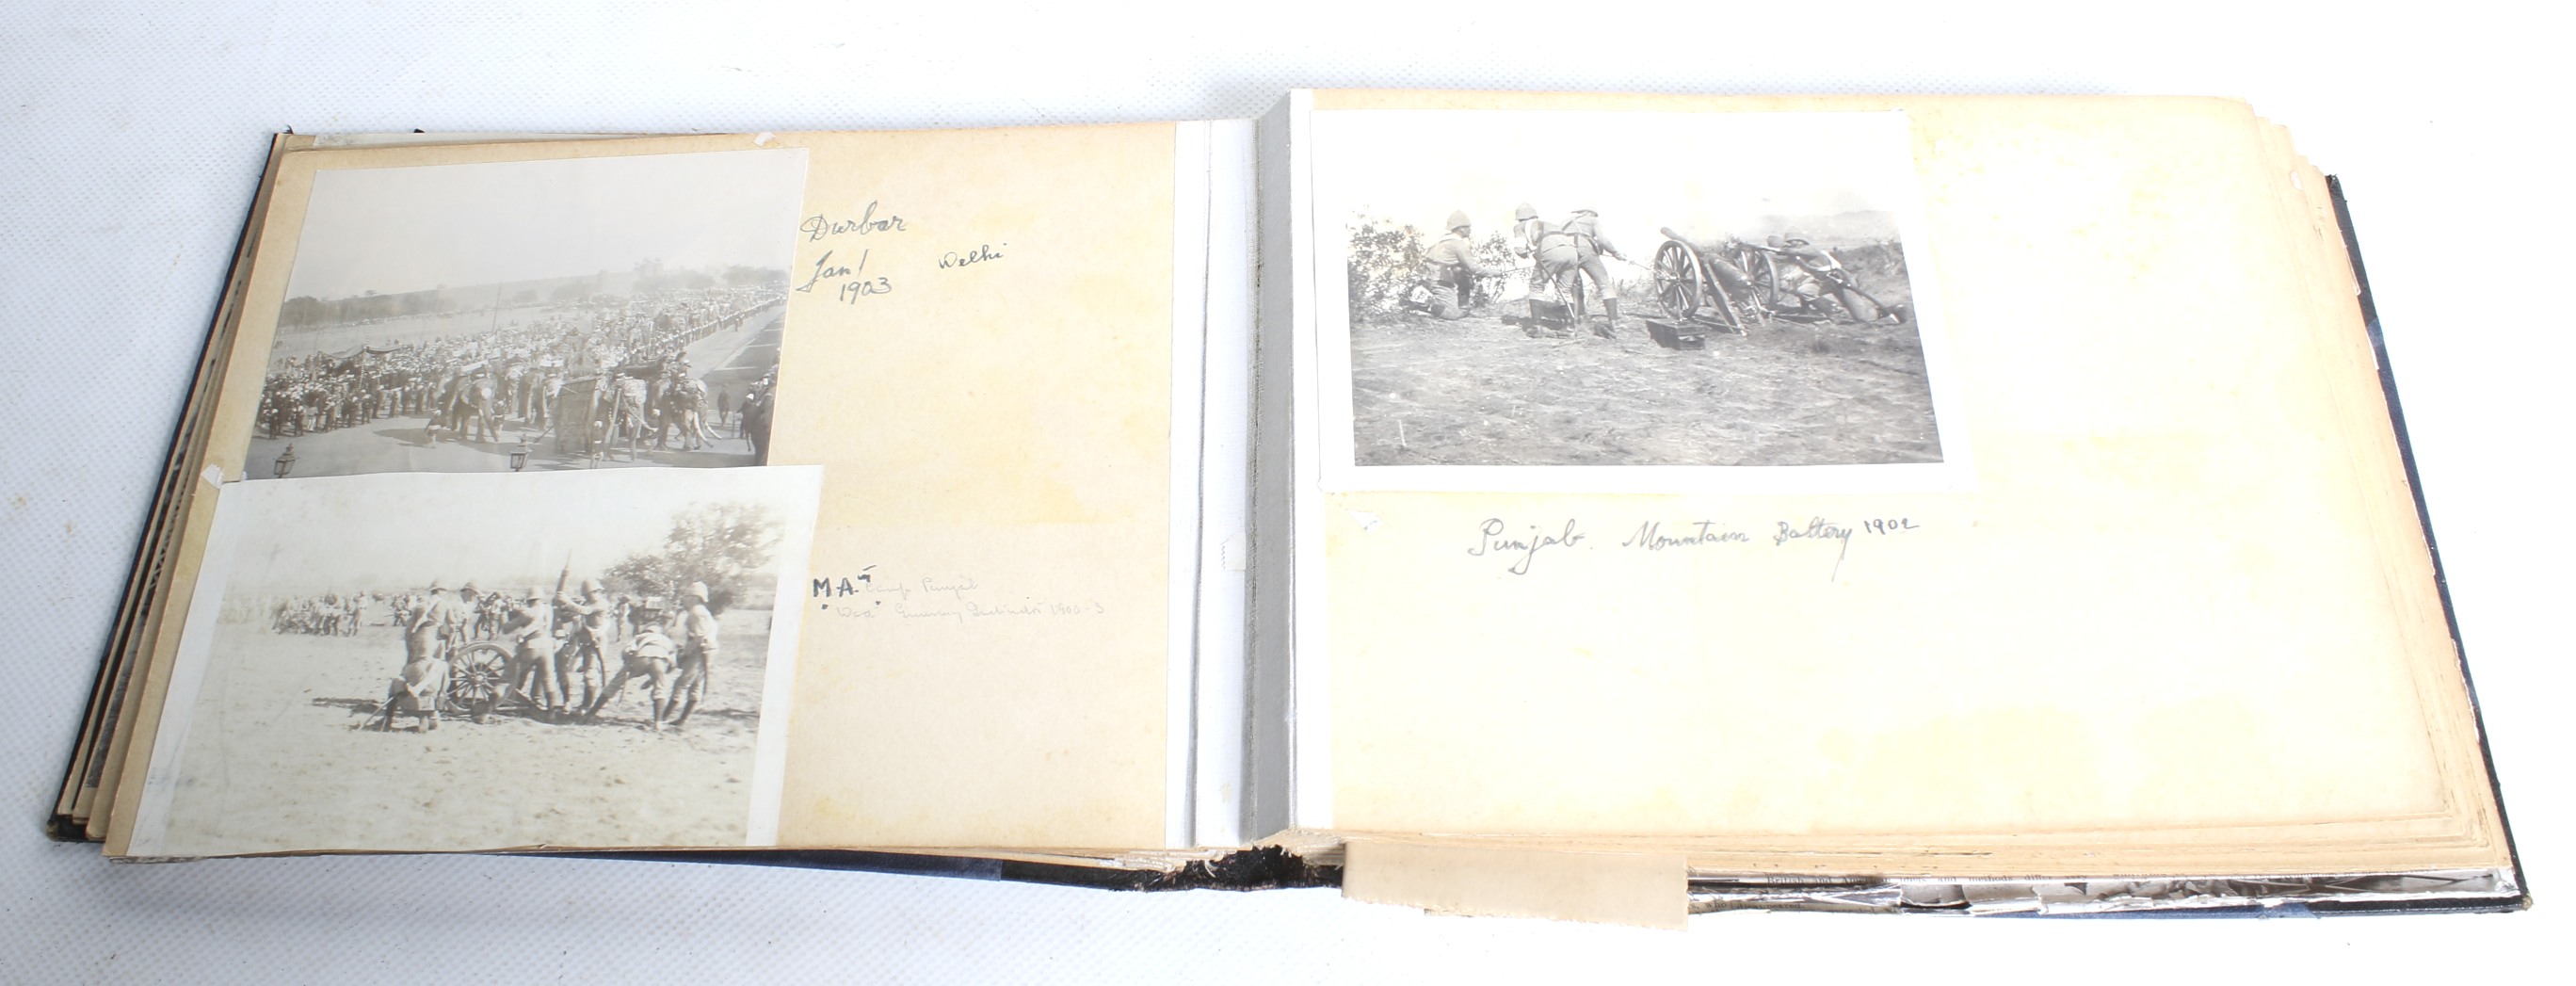 A circa 1900 album of photographs and ephemera, an autograph book and a certificate of thanks. - Image 4 of 6